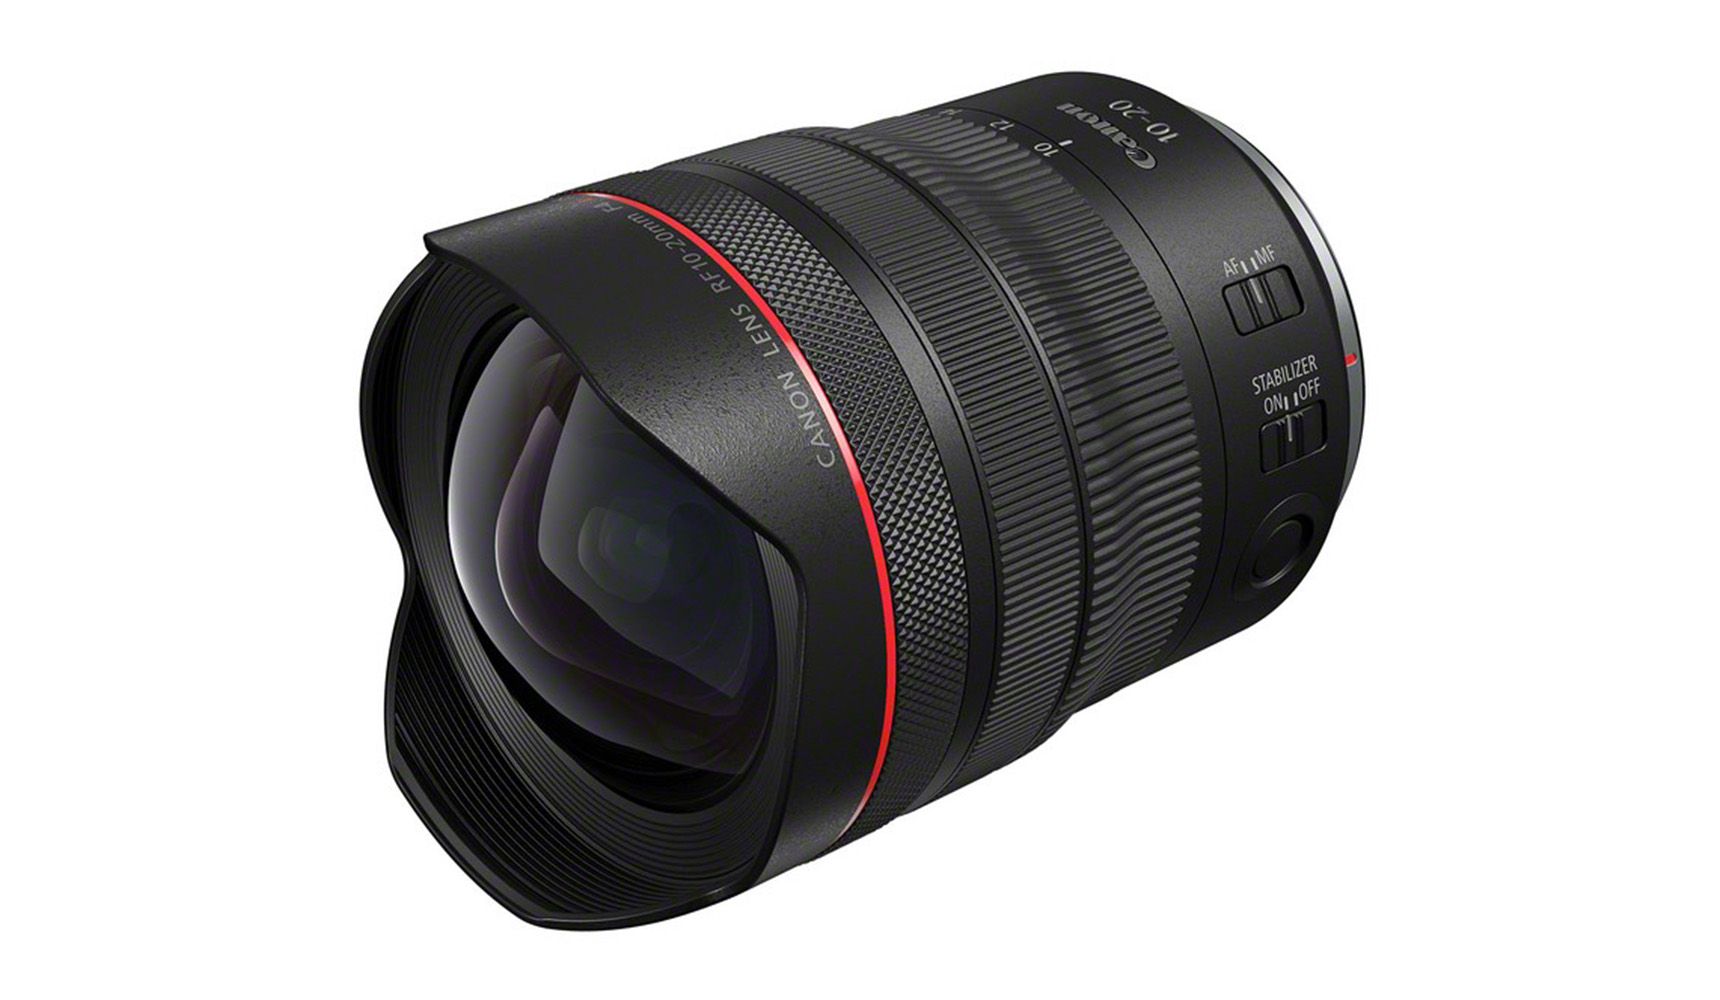 CANON - 6182C005 - Objectif RF 10-20mm F4L IS STM